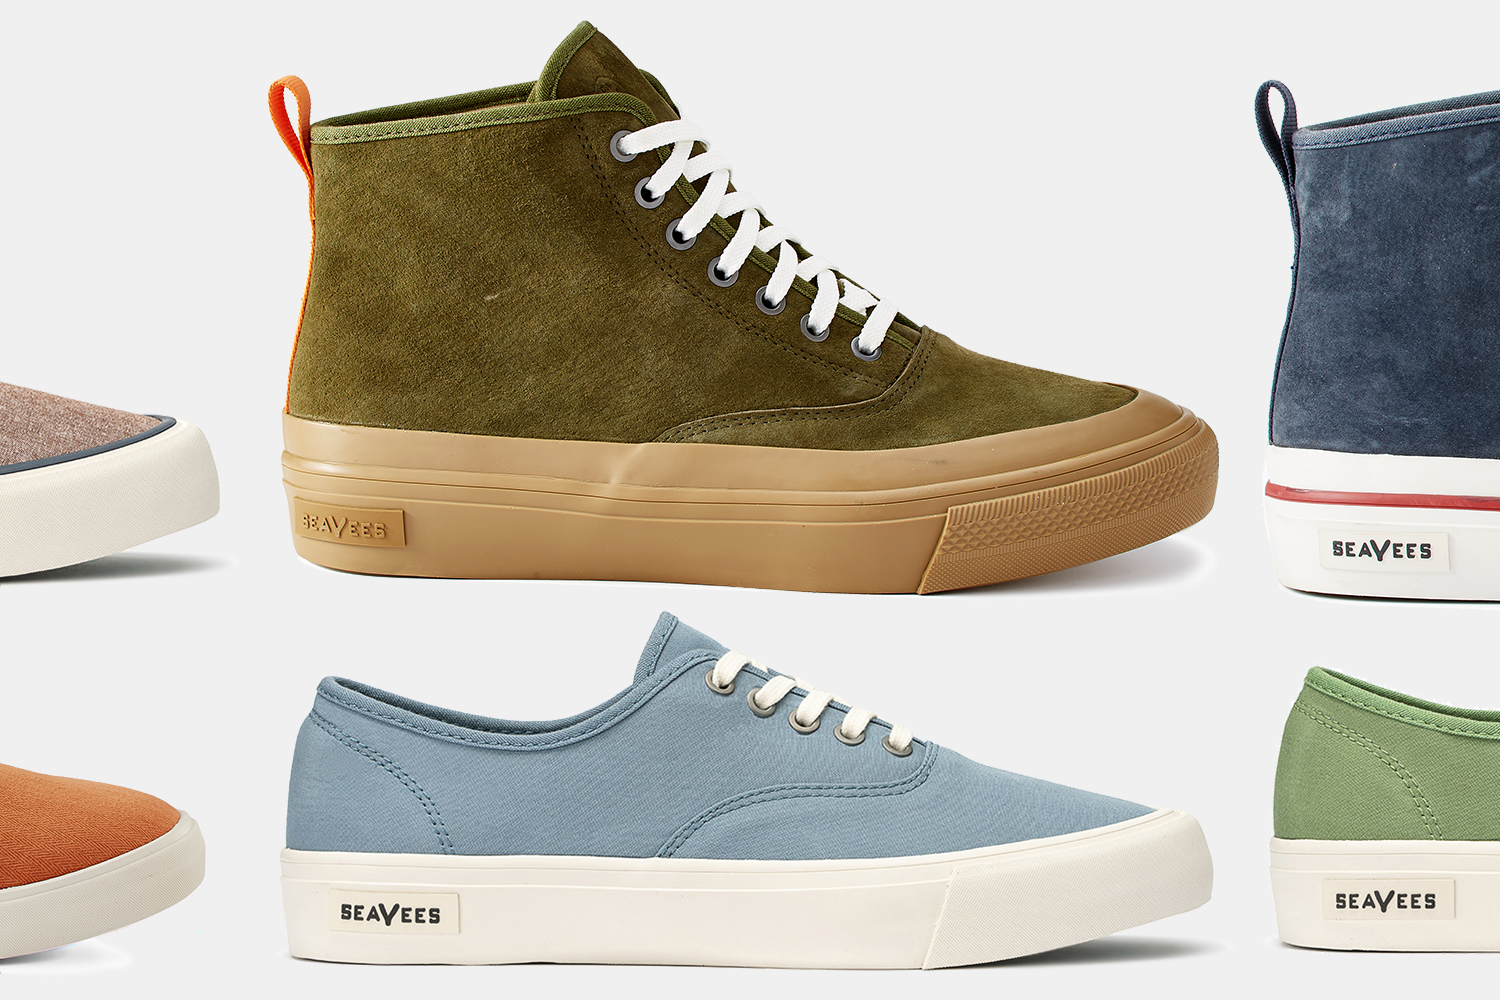 SeaVees Sneakers Are Discounted to $36 